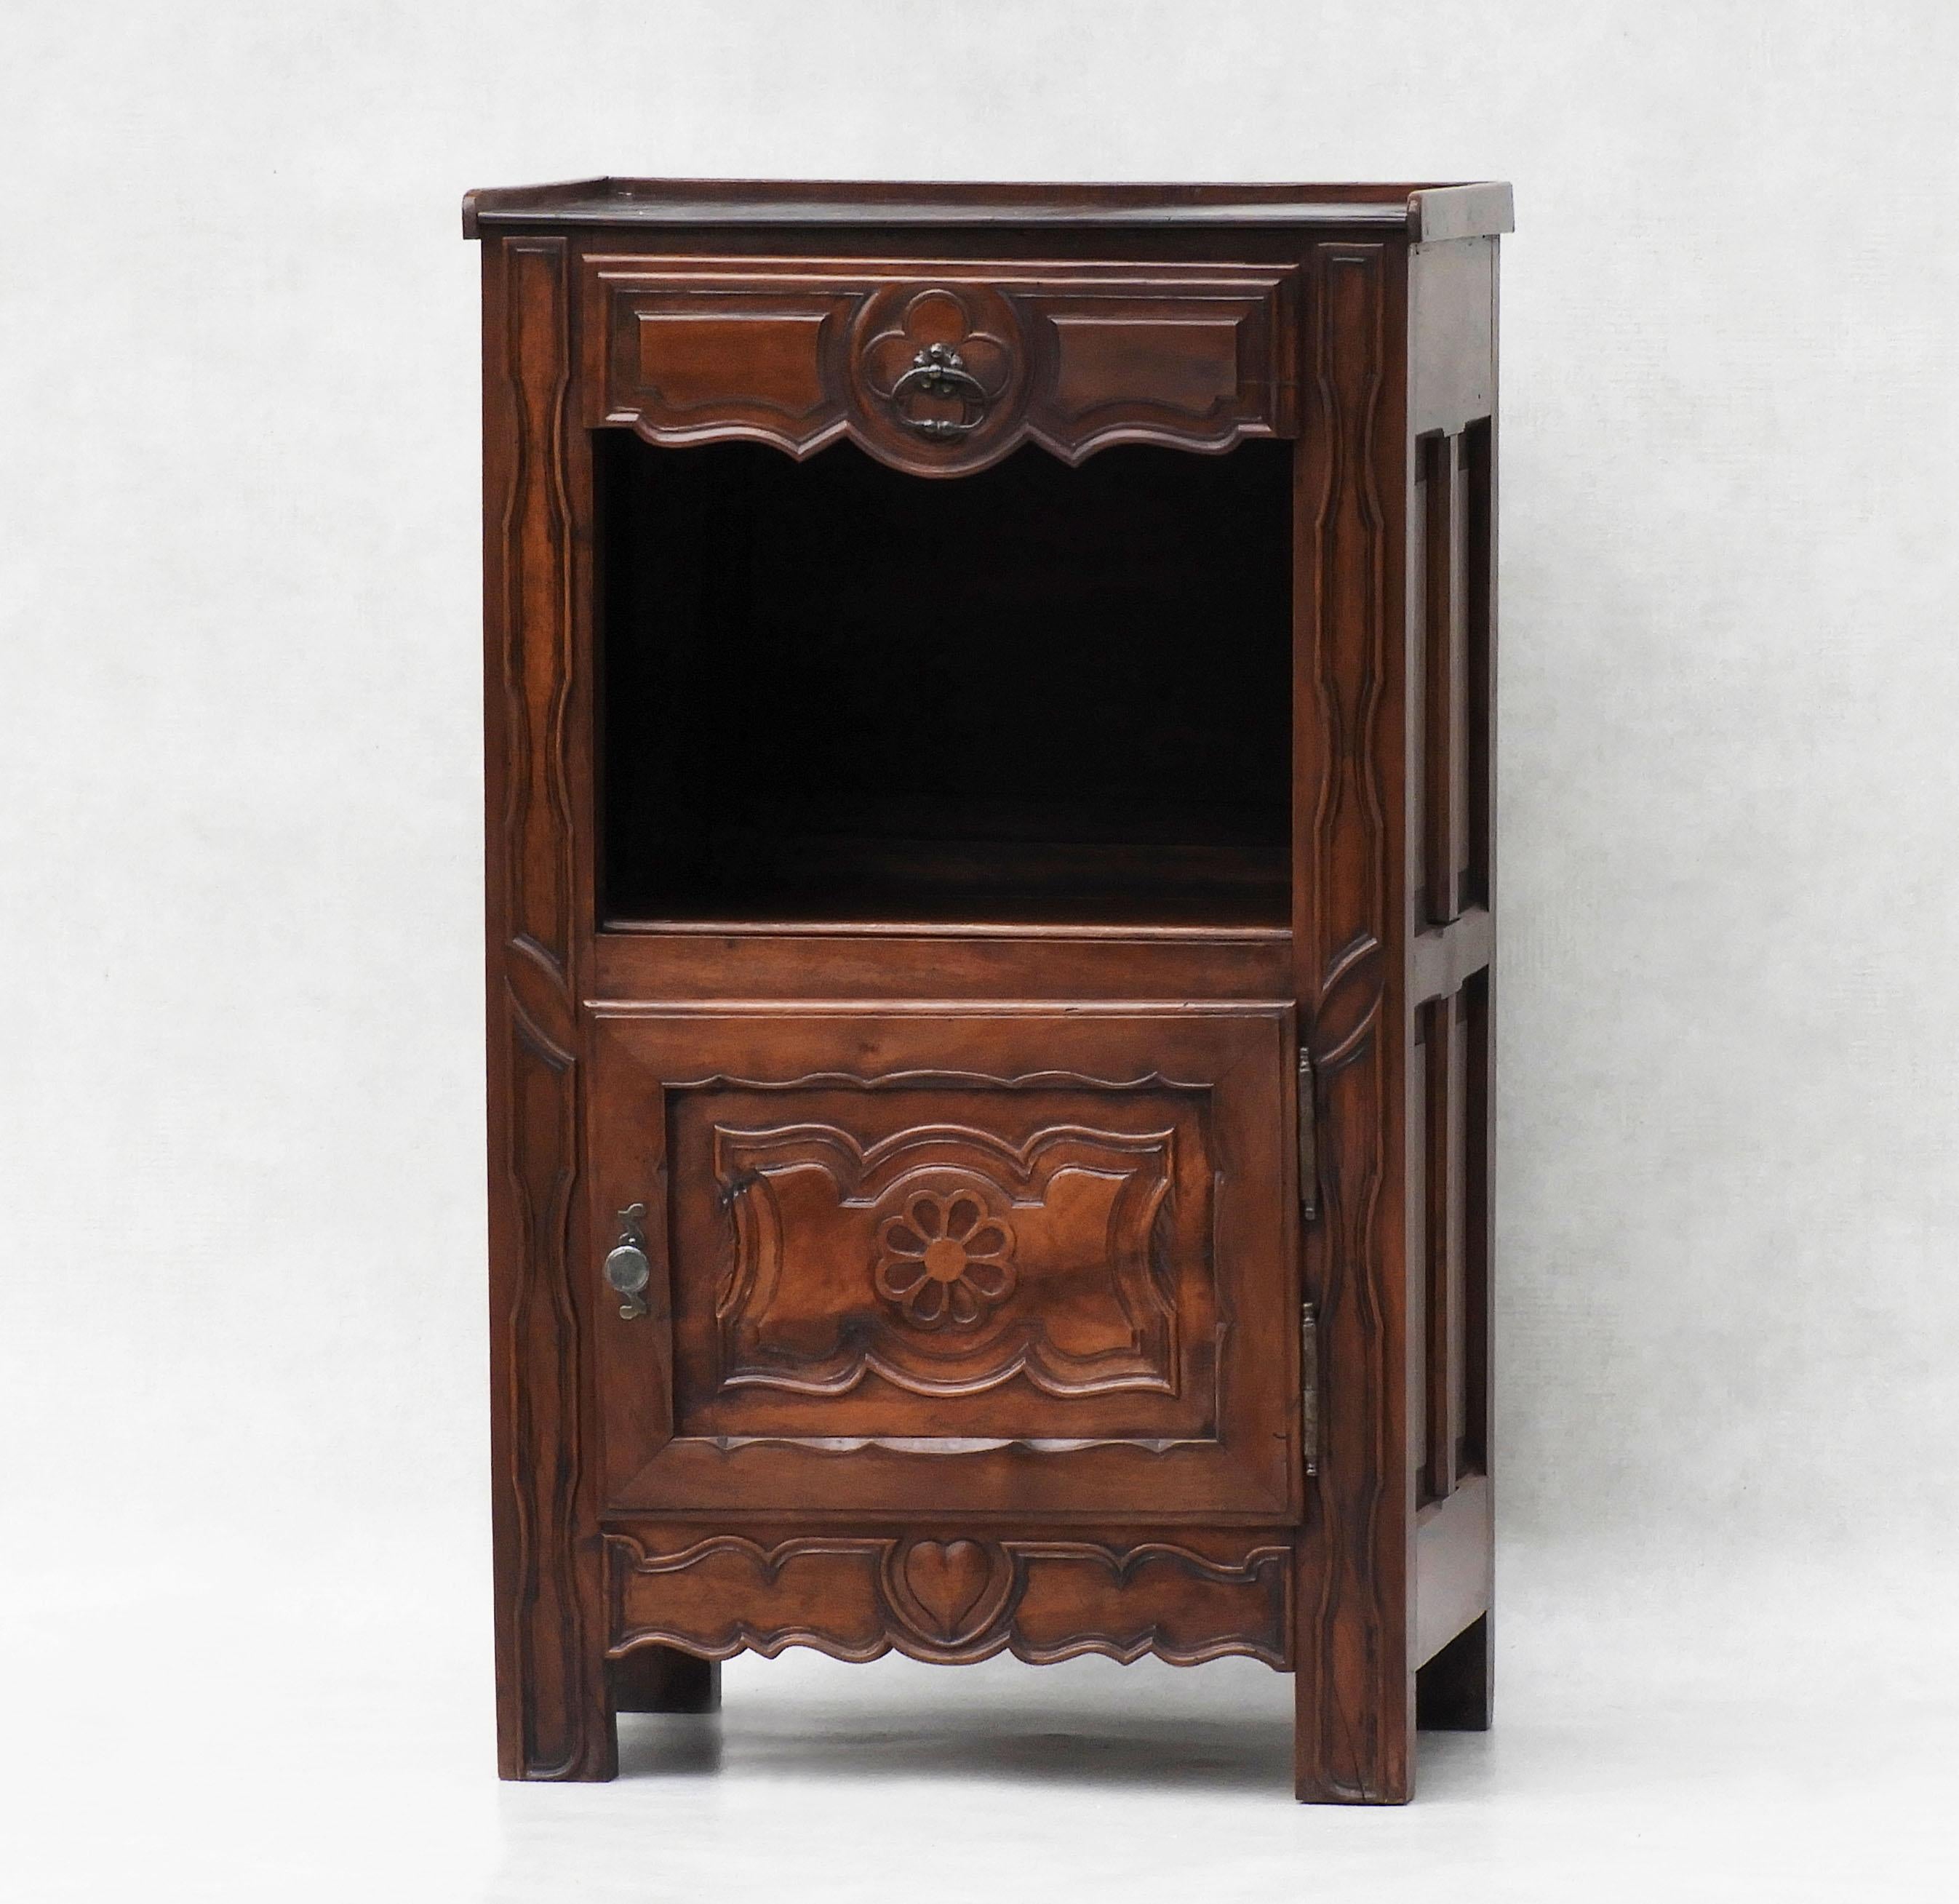 Provincial French walnut cabinet, circa 1890.
Beautiful one of a kind, walnut cabinet with panelled sides and charmingly decorated with heart and flower carvings.
Spacious and practical featuring a drawer, a cupboard and a cubbyhole. Can be used as